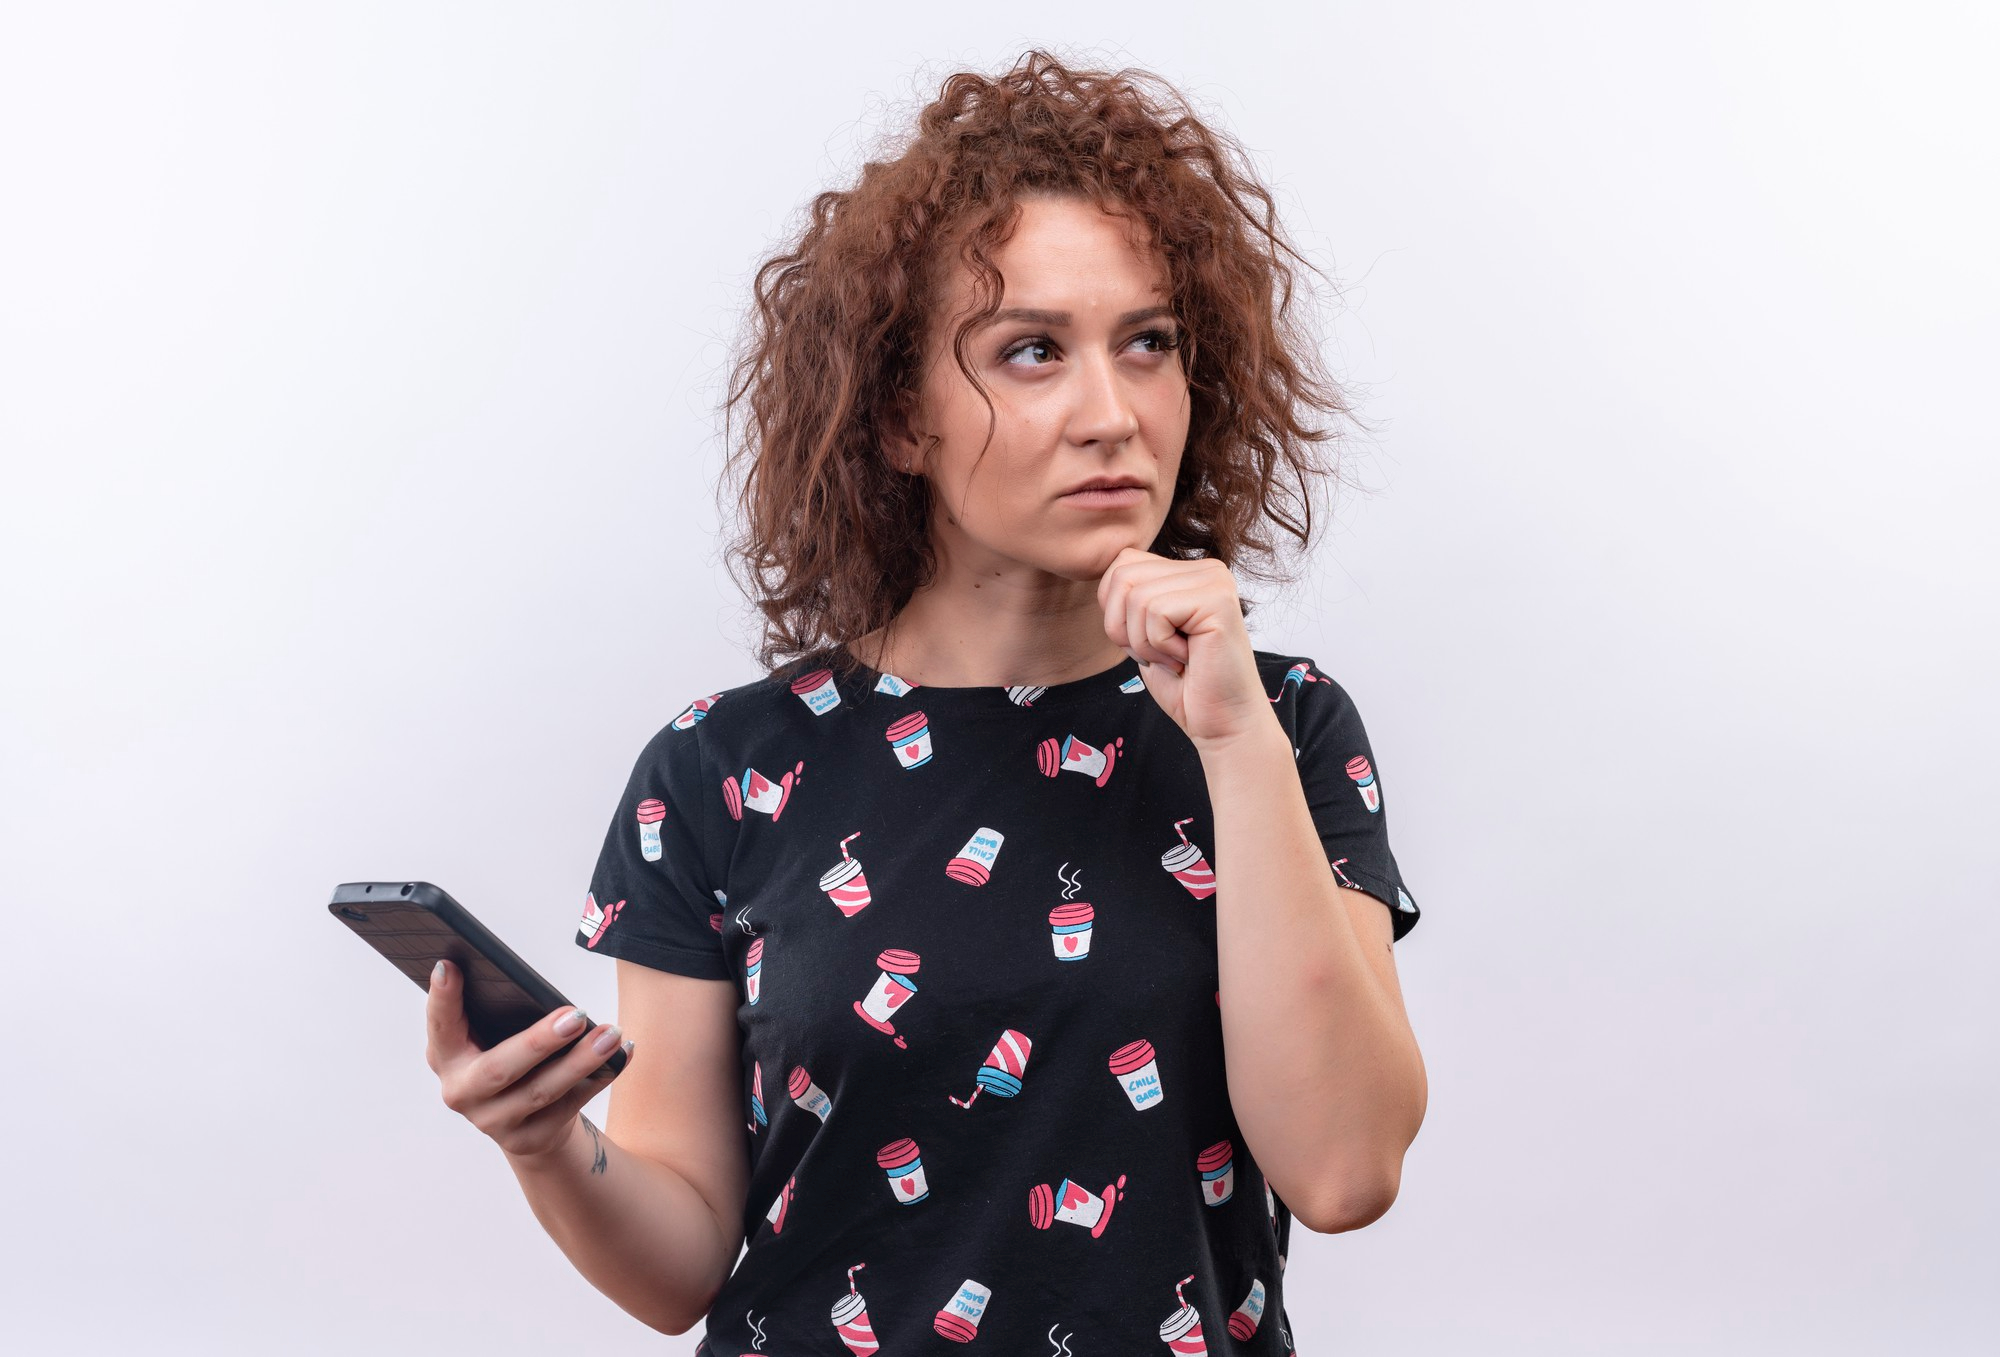 A woman holding a phone and plotting something | Source: Freepik